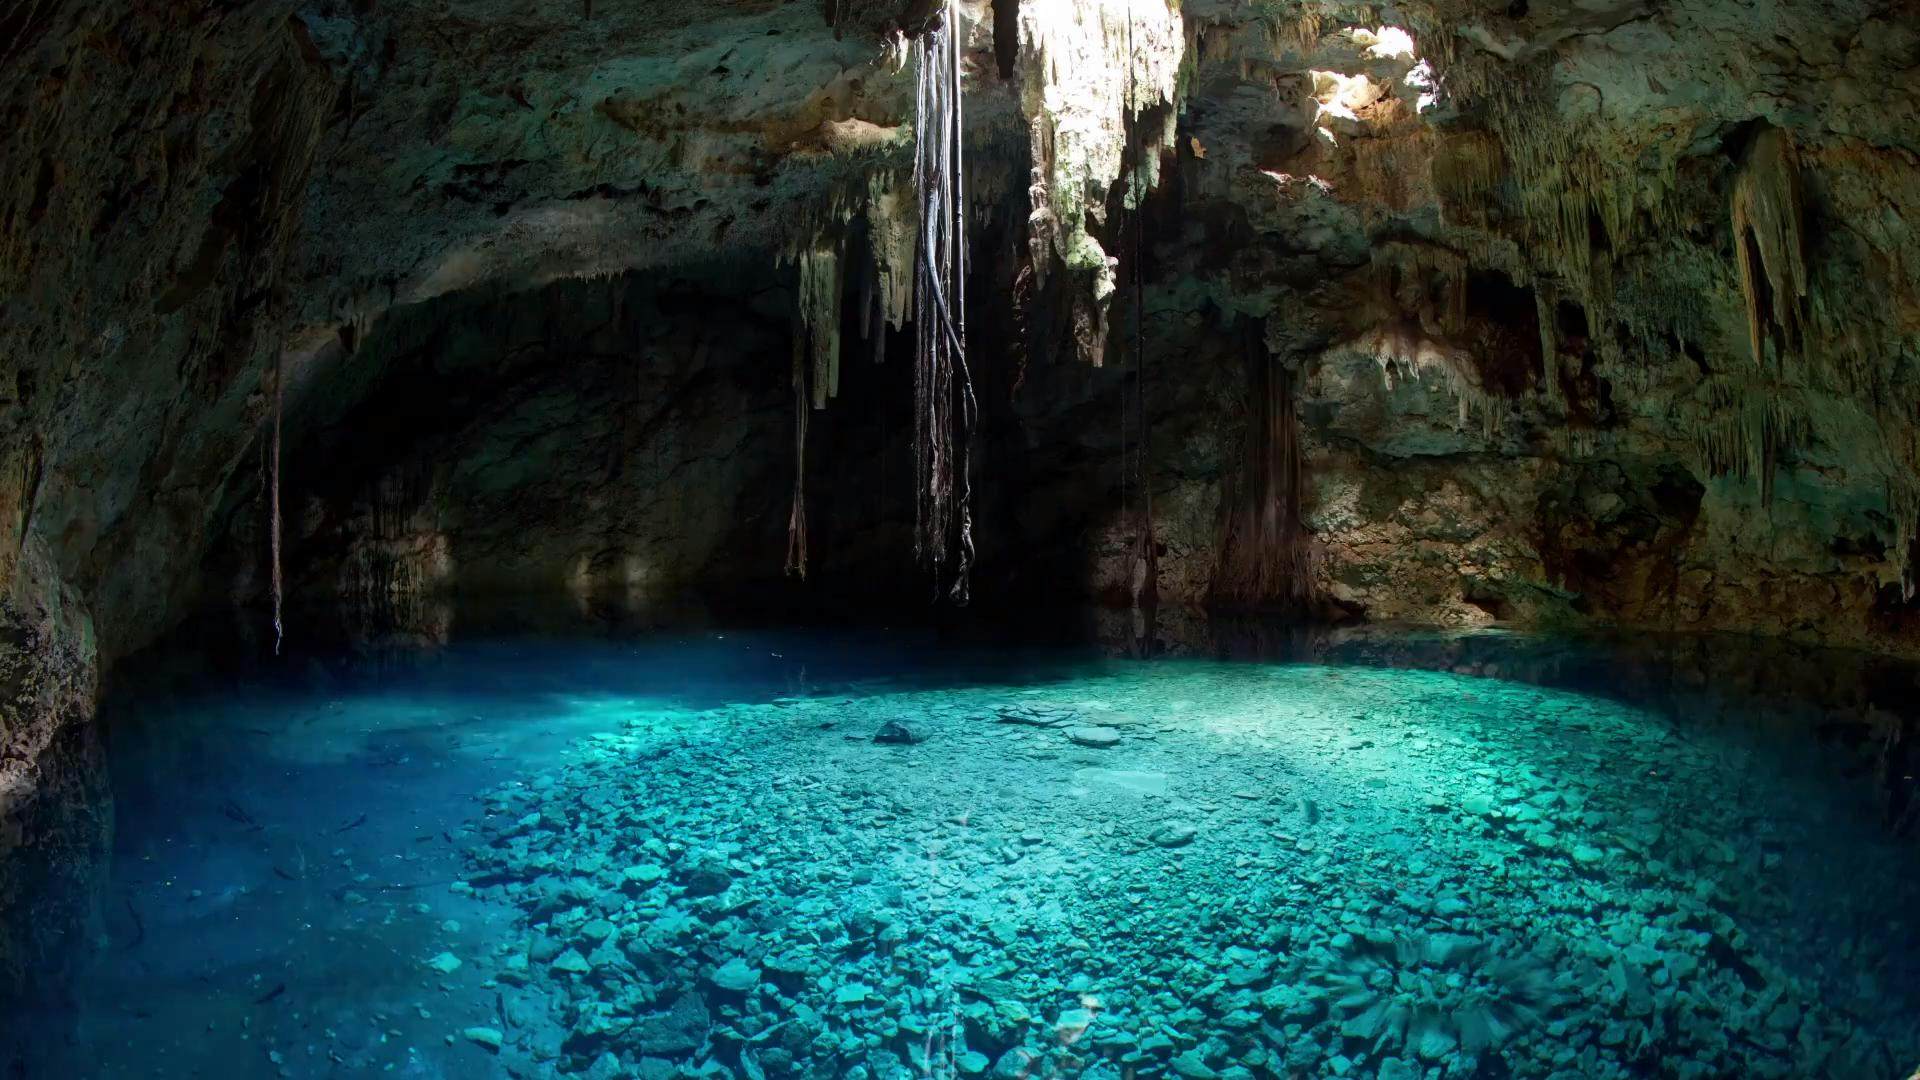 Discover Mexico's secret swimming holes - Lonely Planet Video